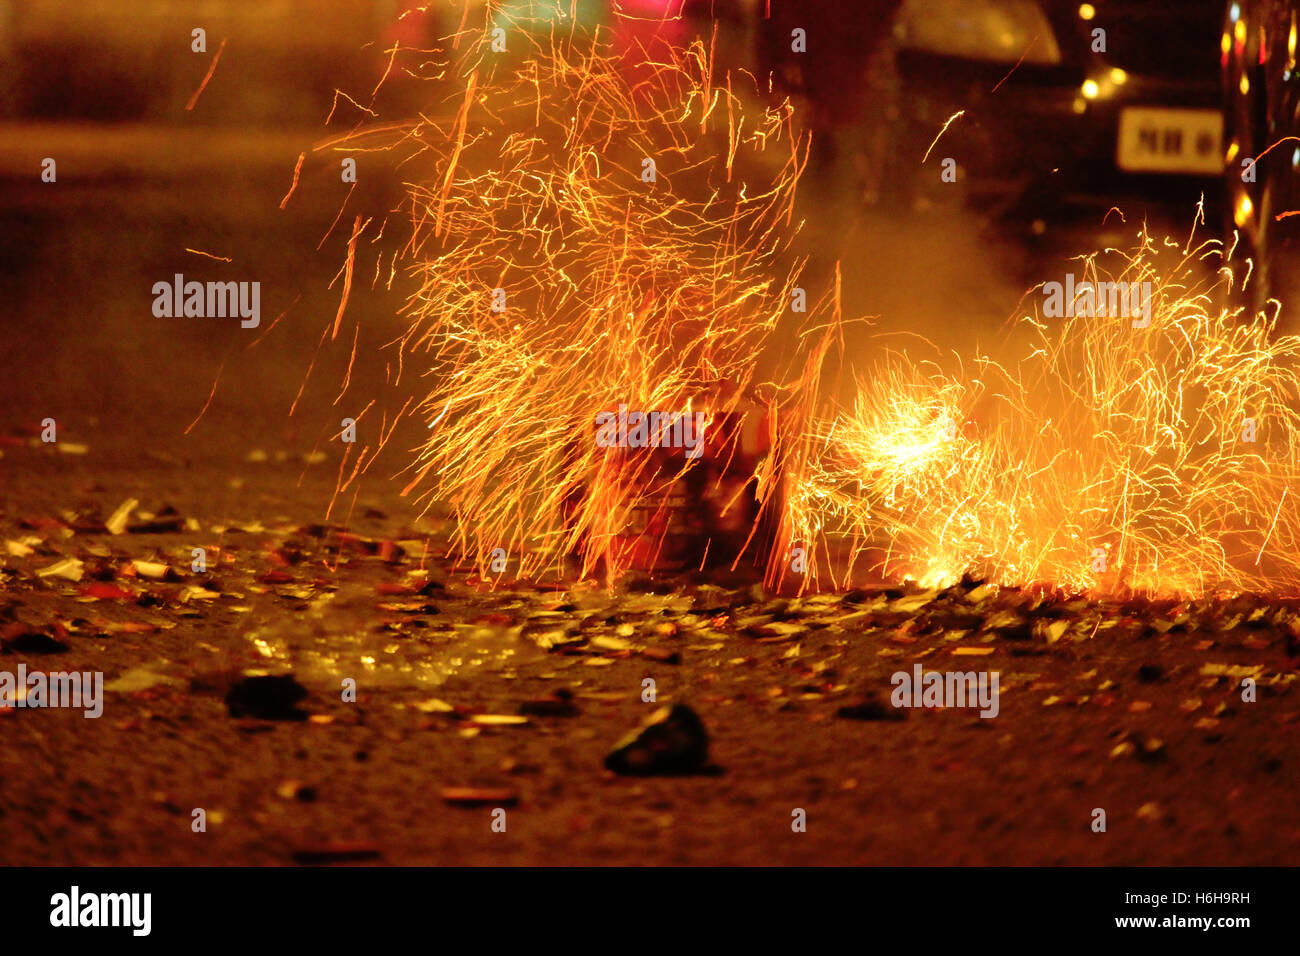 Fireworks or firecrackers during Diwali or Christmas festival Stock Photo